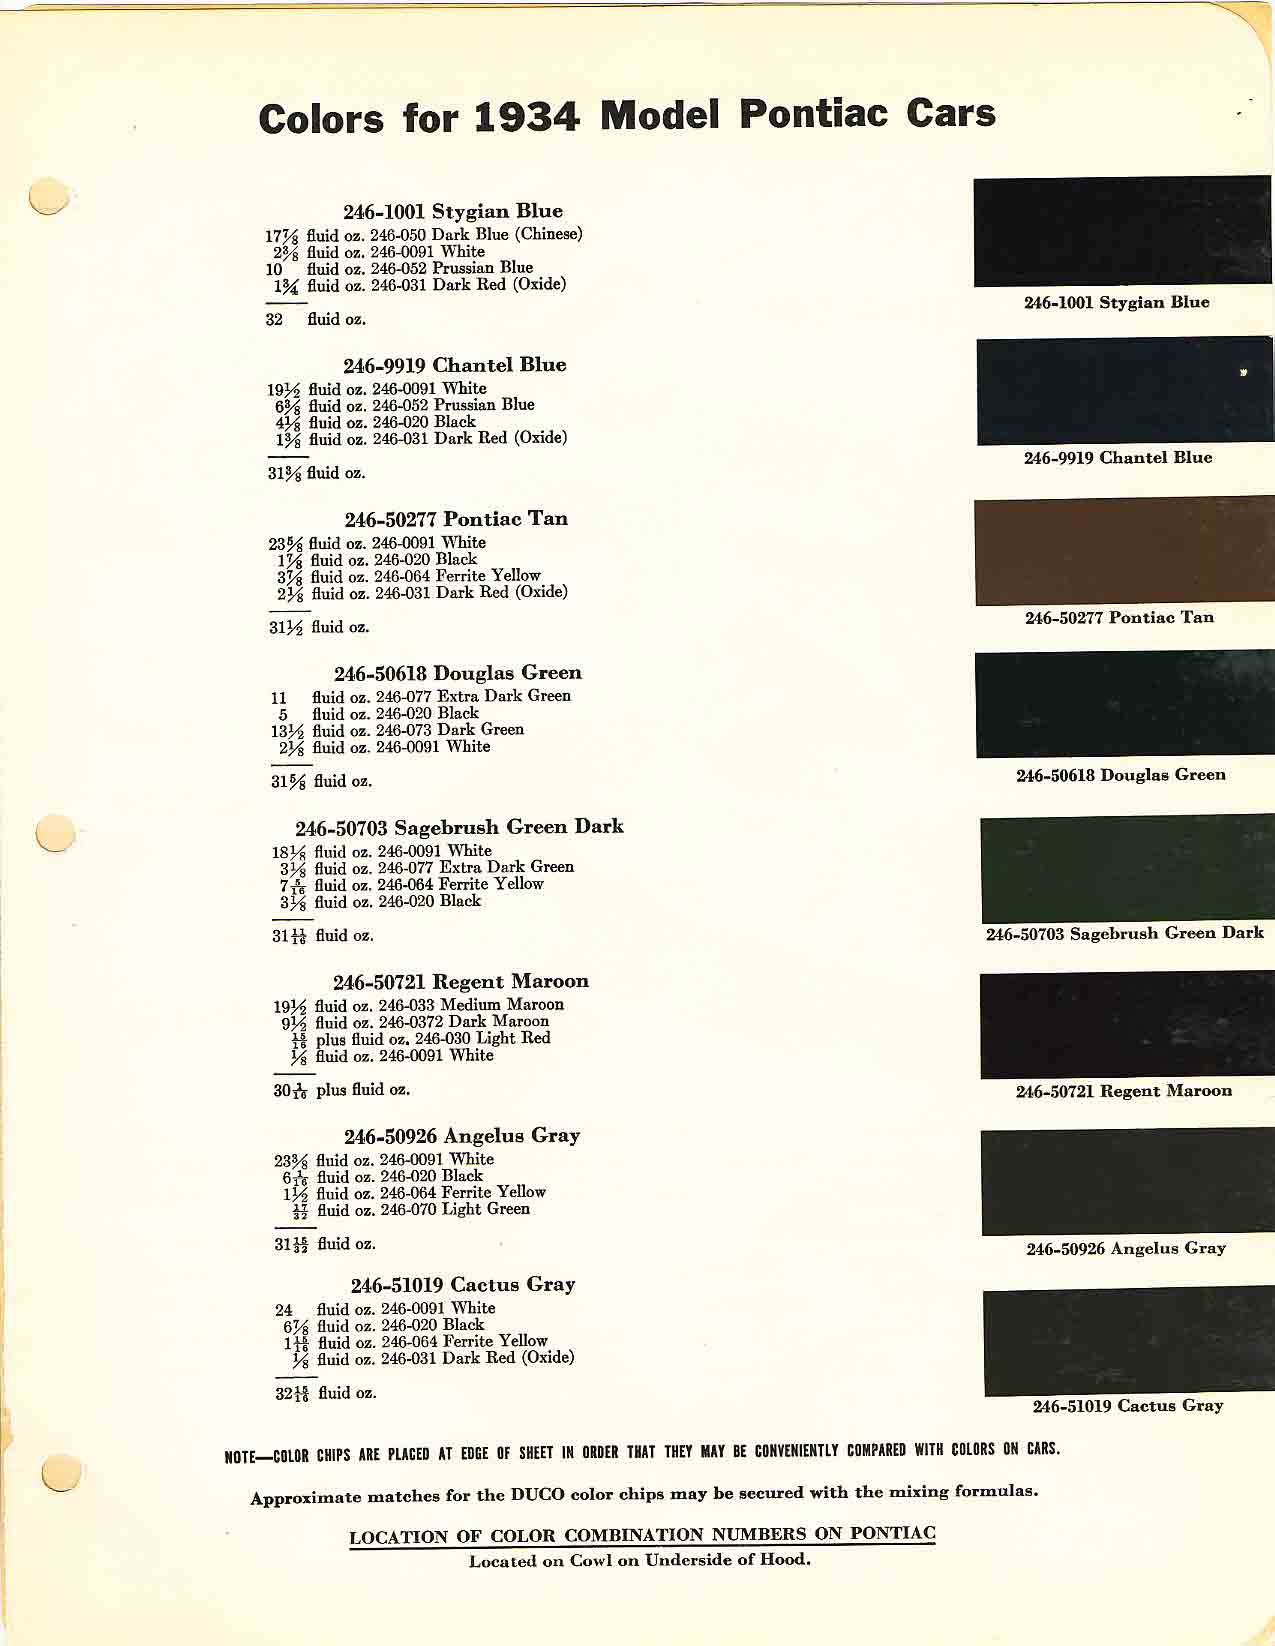 Colors and codes used on Pontiac Vehicles in 1934